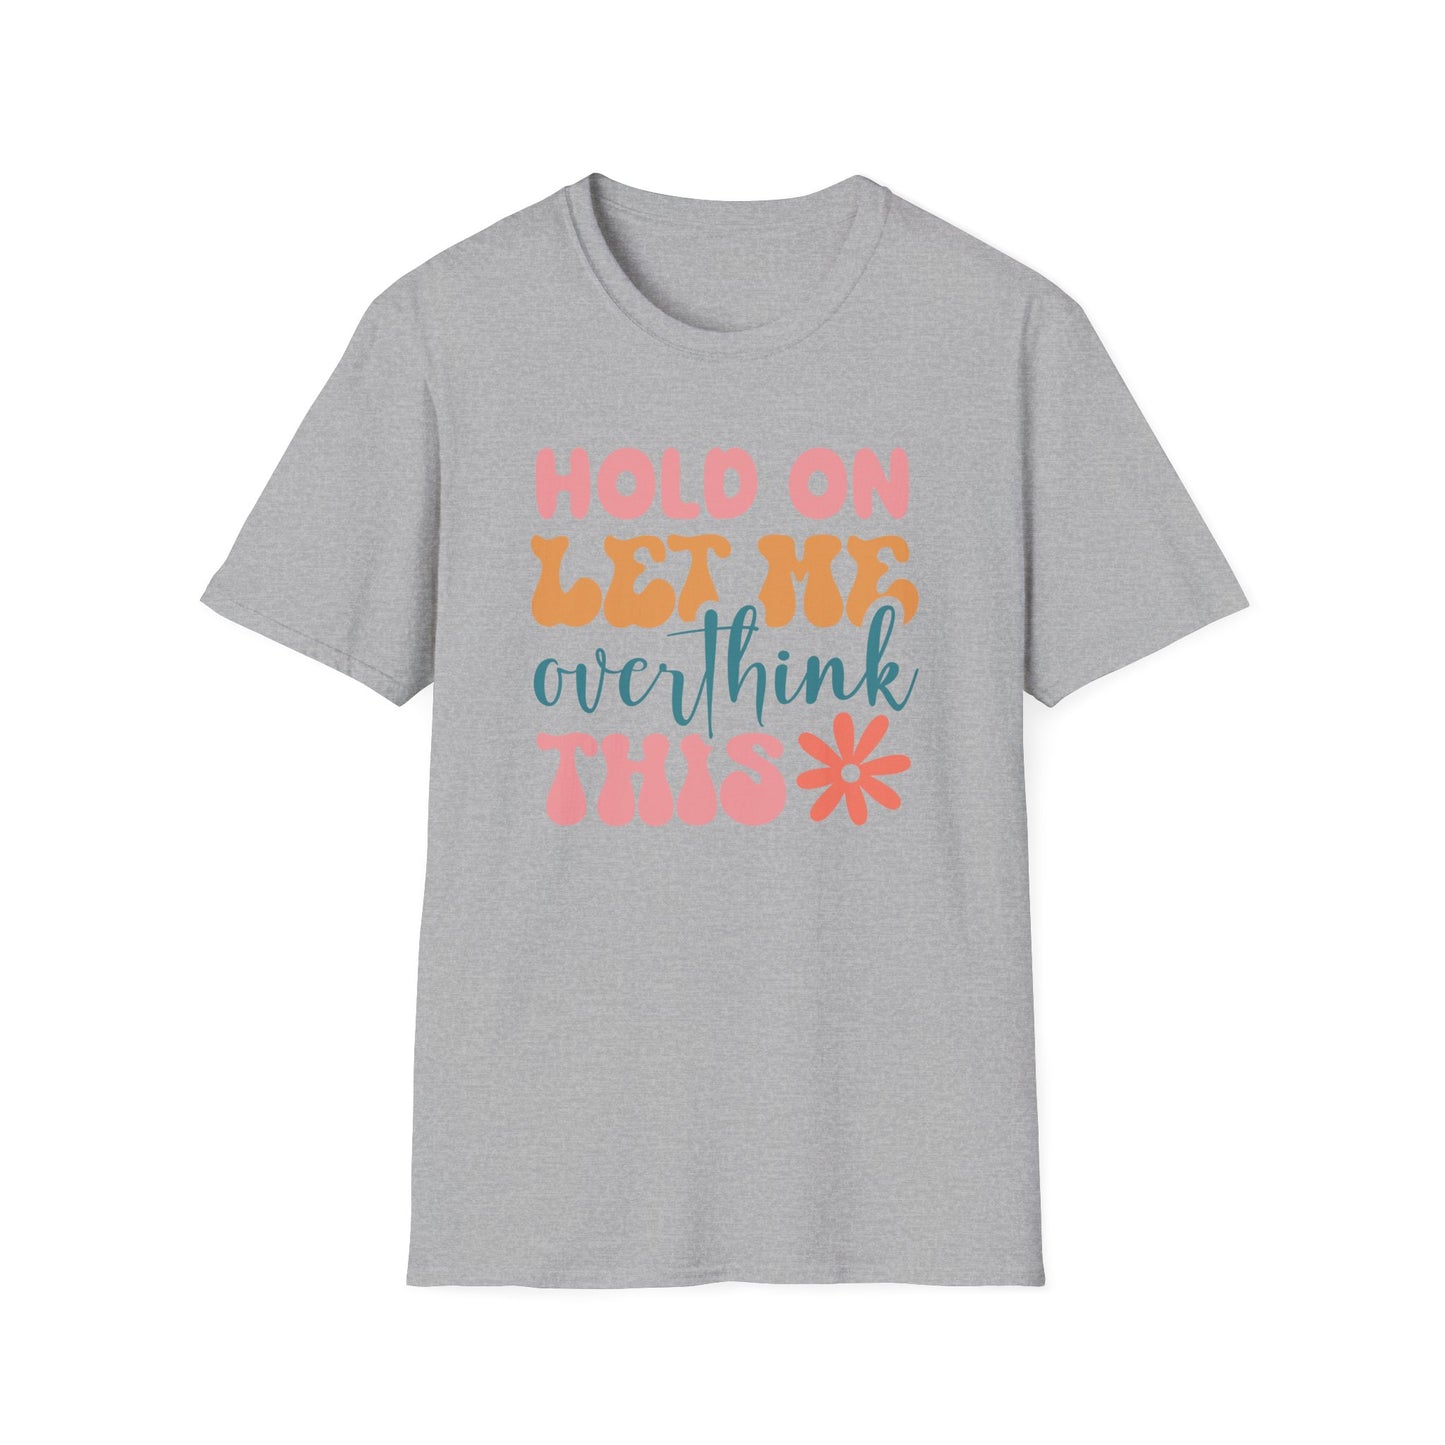 Hold on Let me Overthink This - Unisex Softstyle T-Shirt